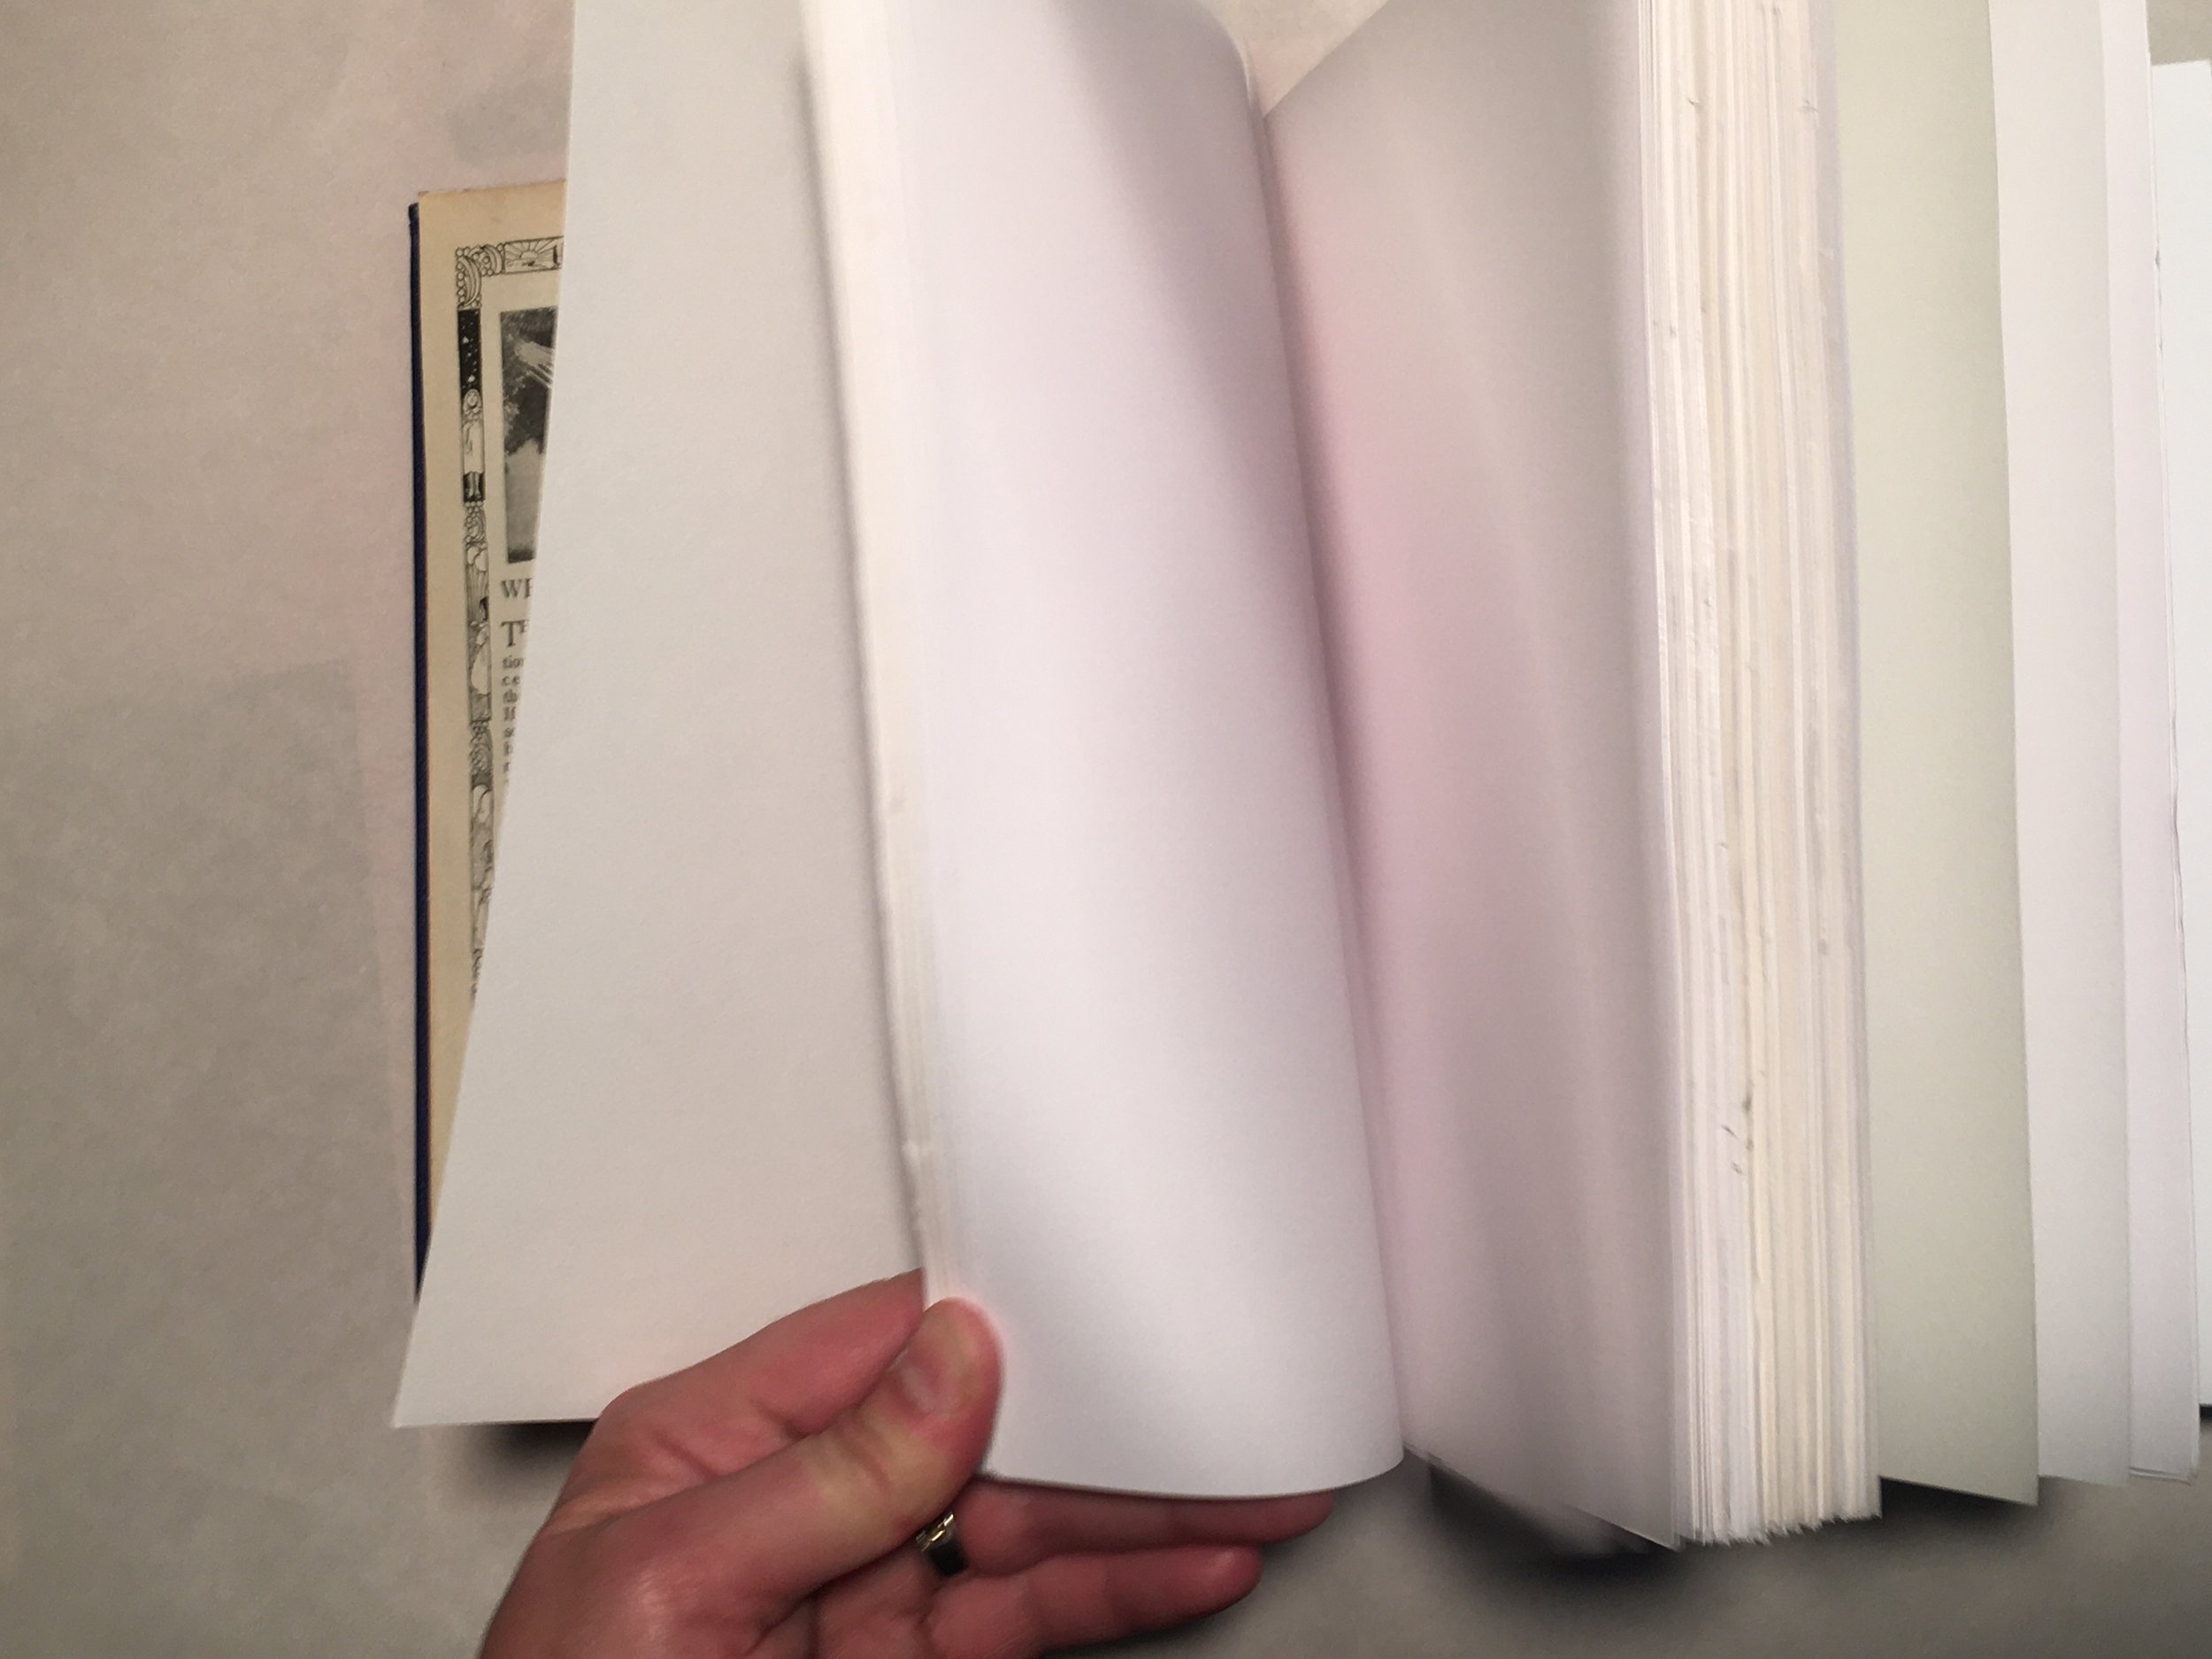 Book of Knowledge Empty Pages.JPG